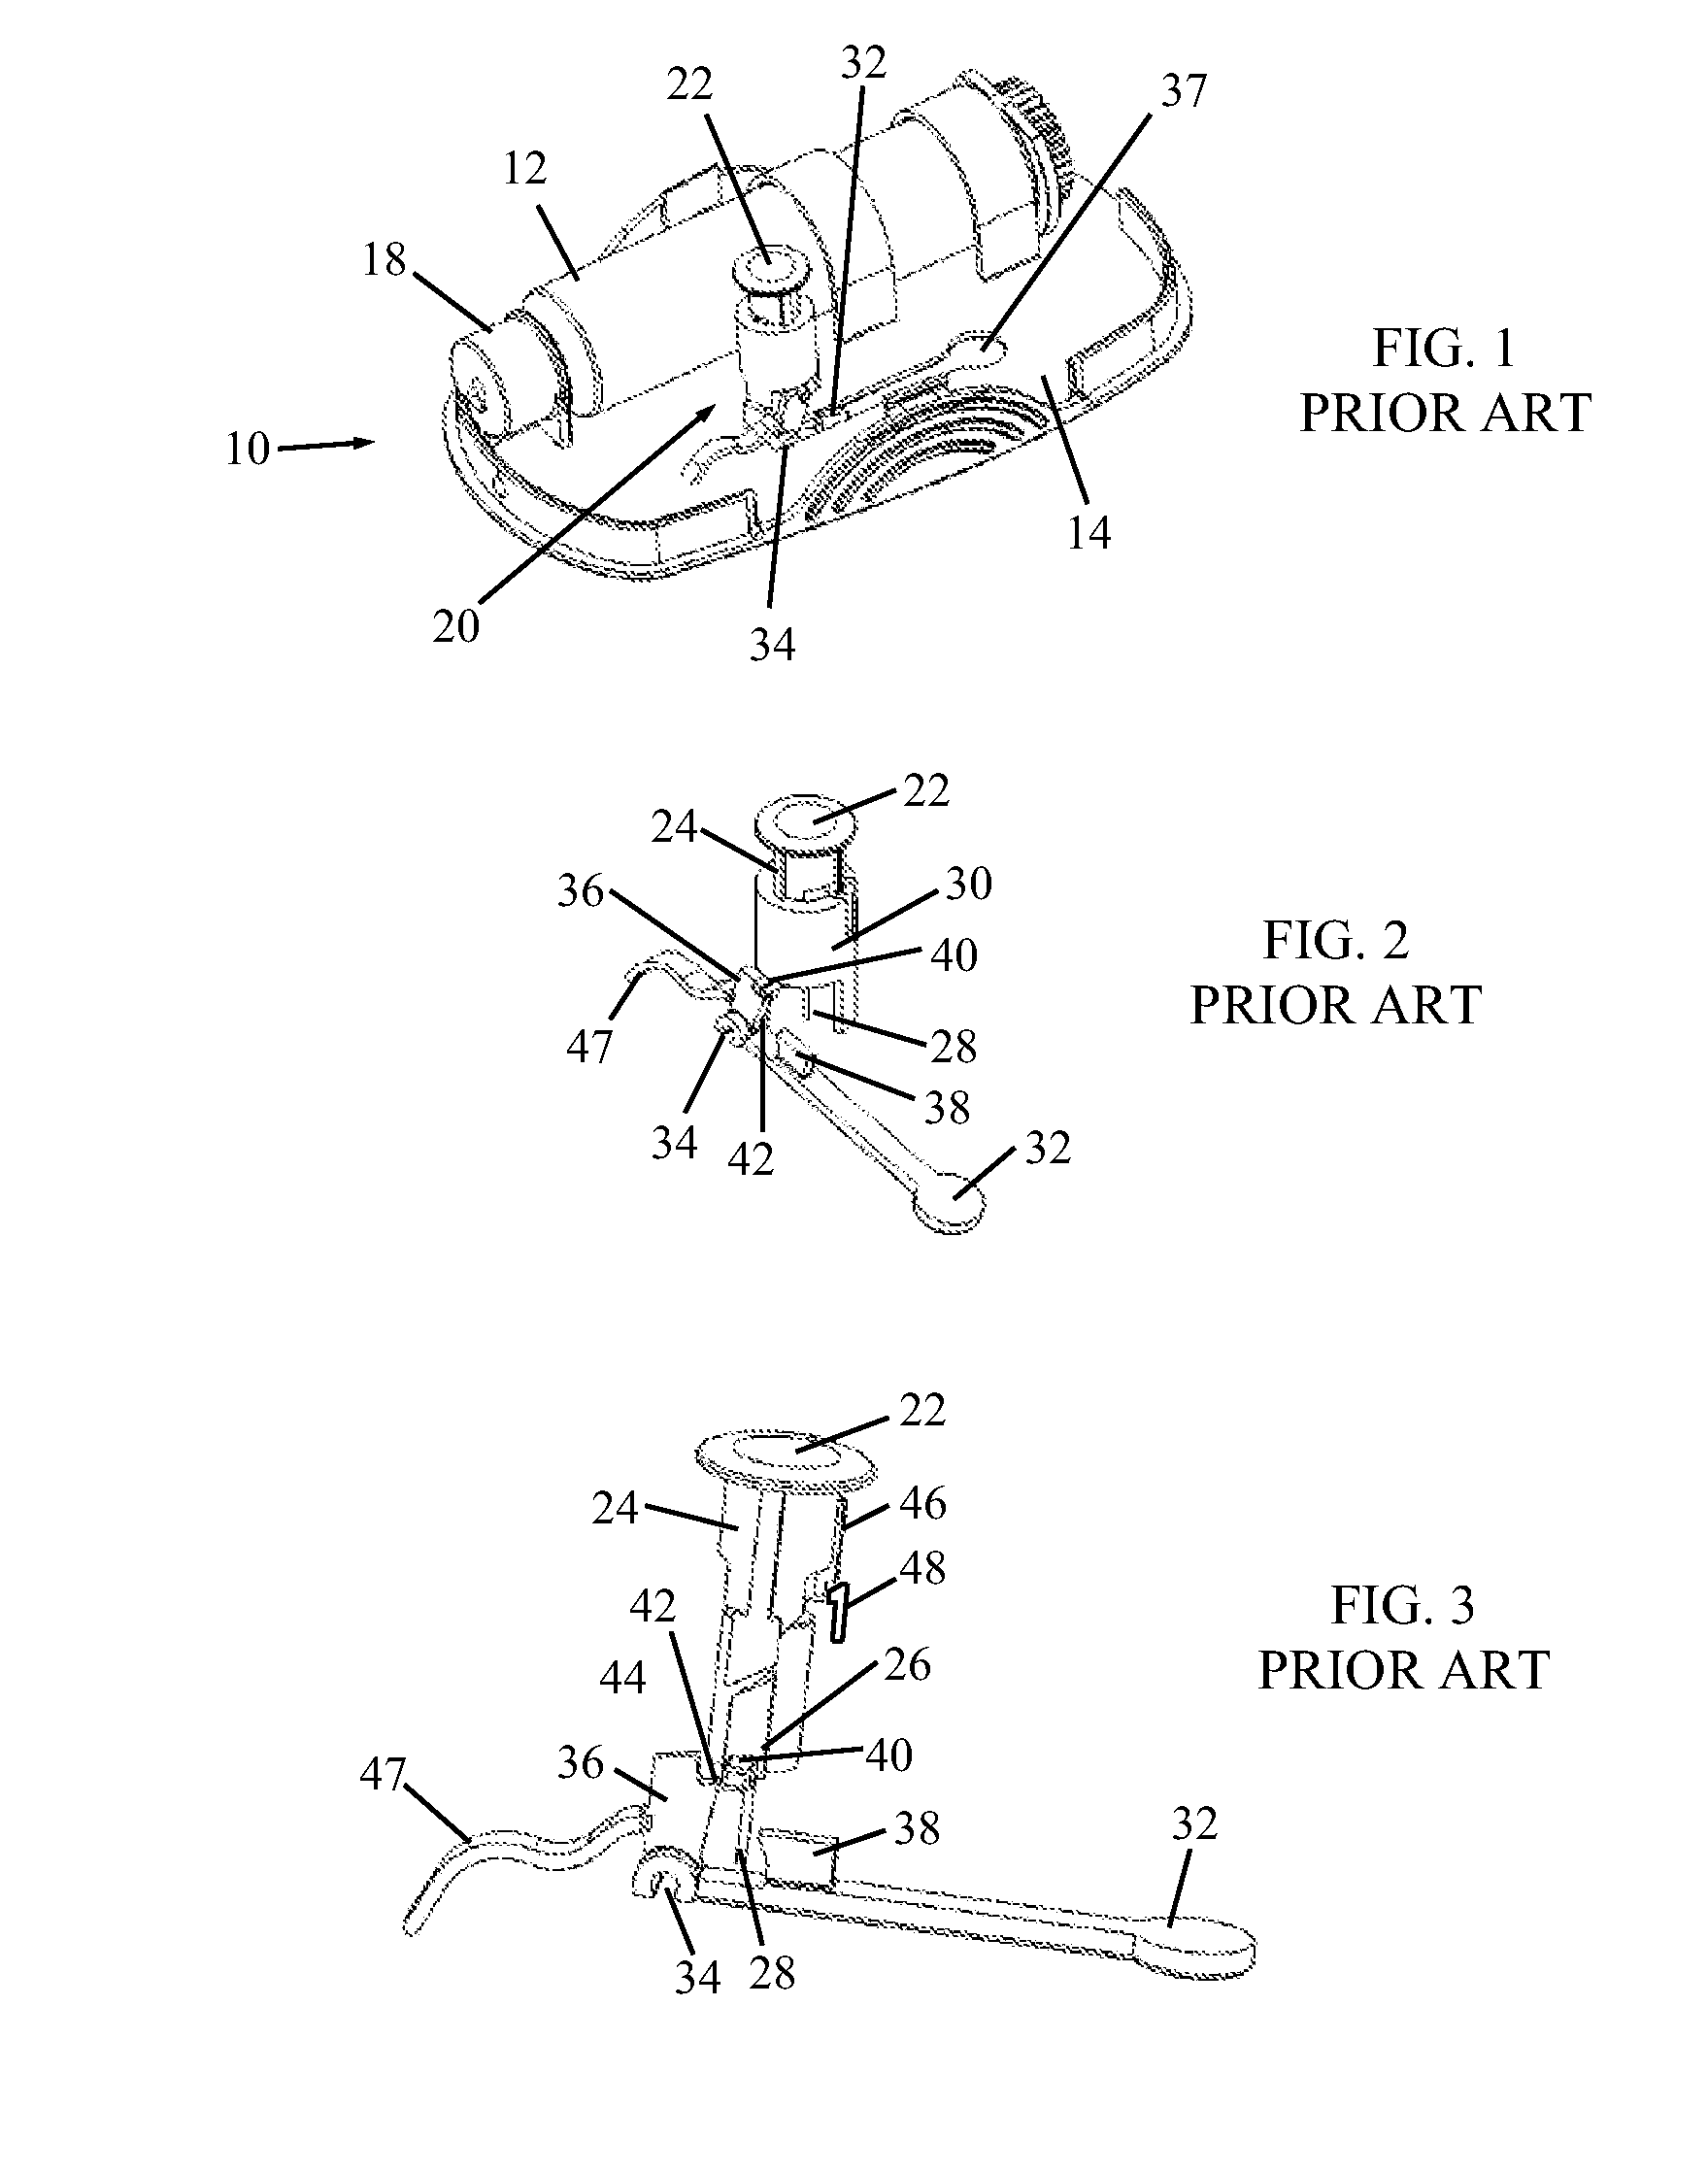 Automatic needle for drug pump